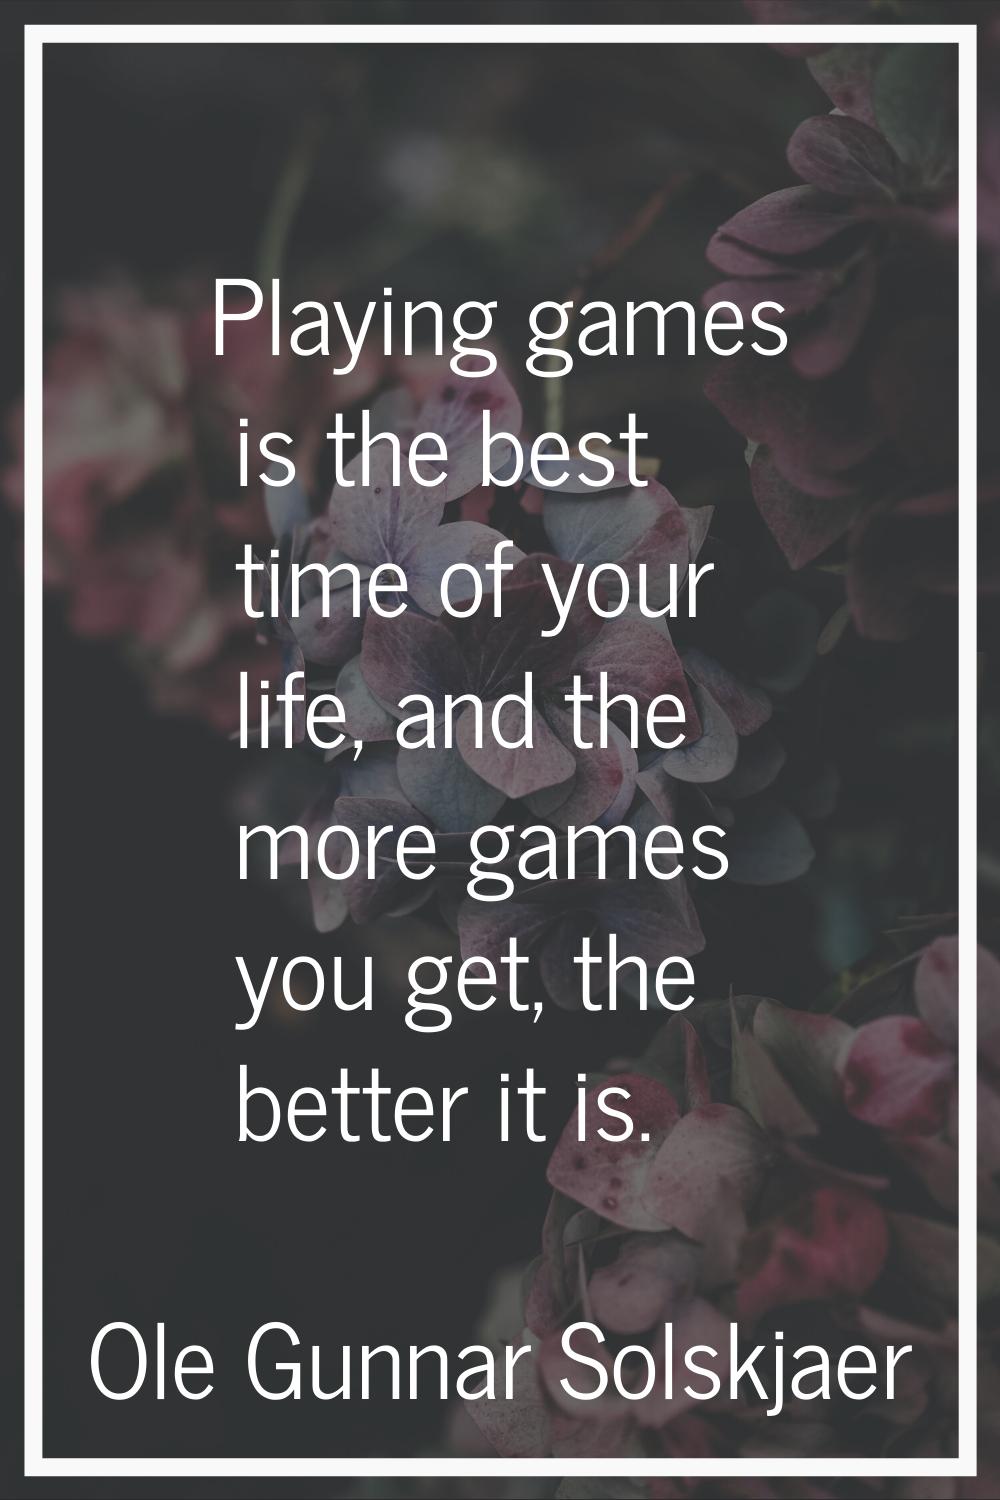 Playing games is the best time of your life, and the more games you get, the better it is.